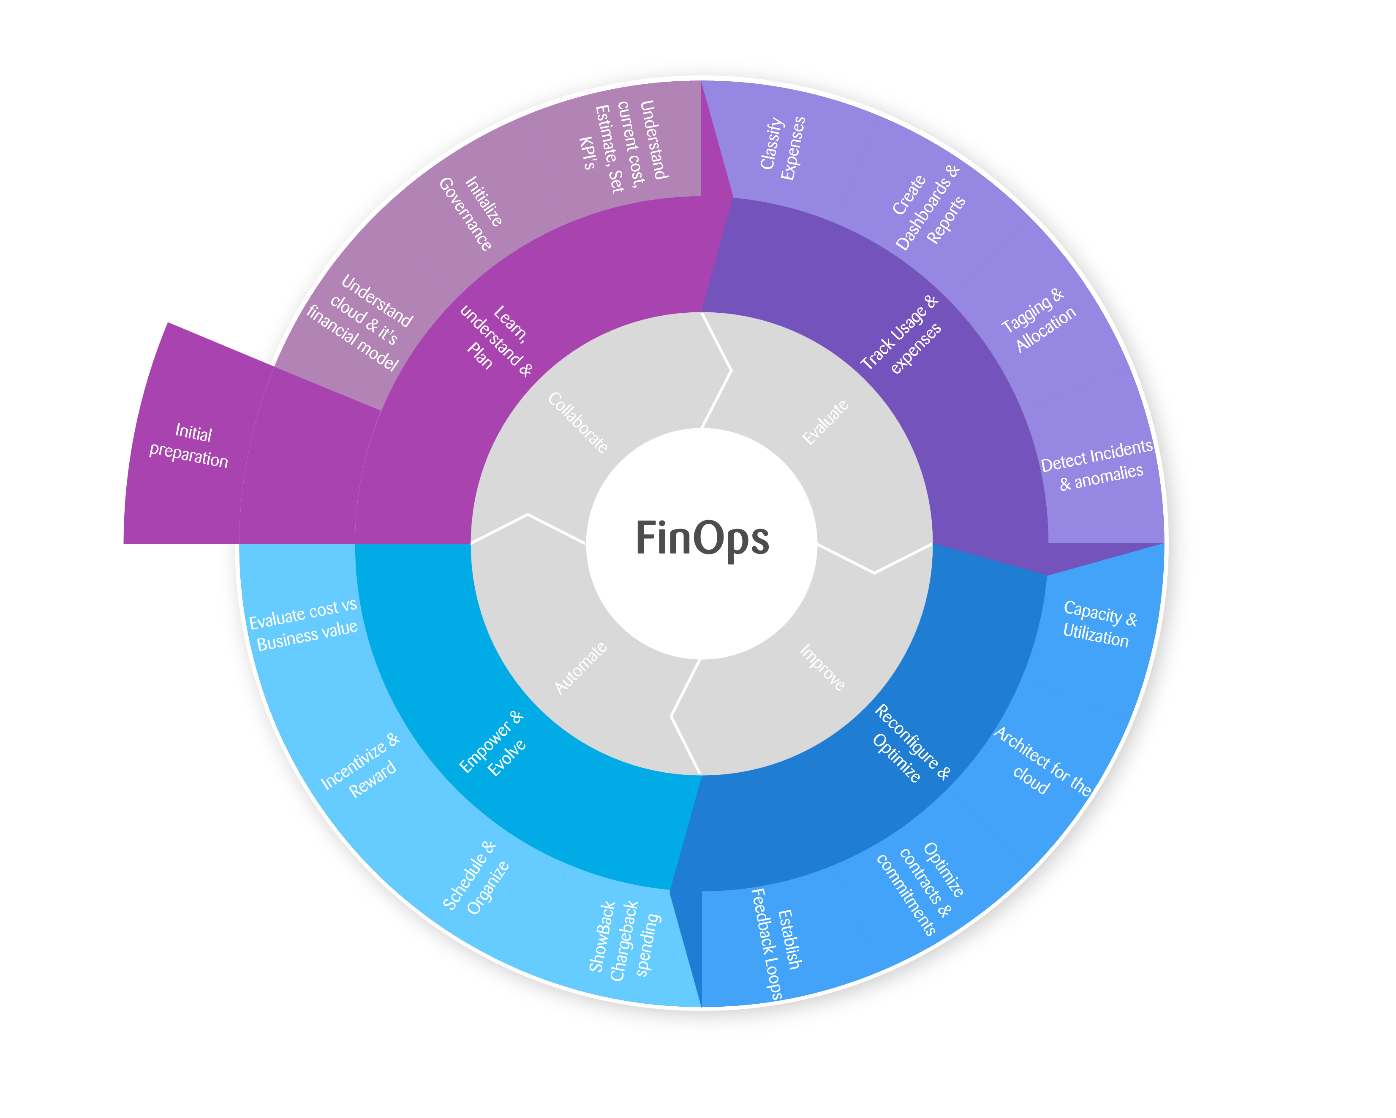 Finops Circle graphic: with core fields being "collaborate", "evaluate", "improve" and "automate". The area of evaluate includes: Track usage & expenses. Improve includes: Reconfigure & optimize. Automate includes: Empower & evolve. Collaborate includes: learn, understand & plan